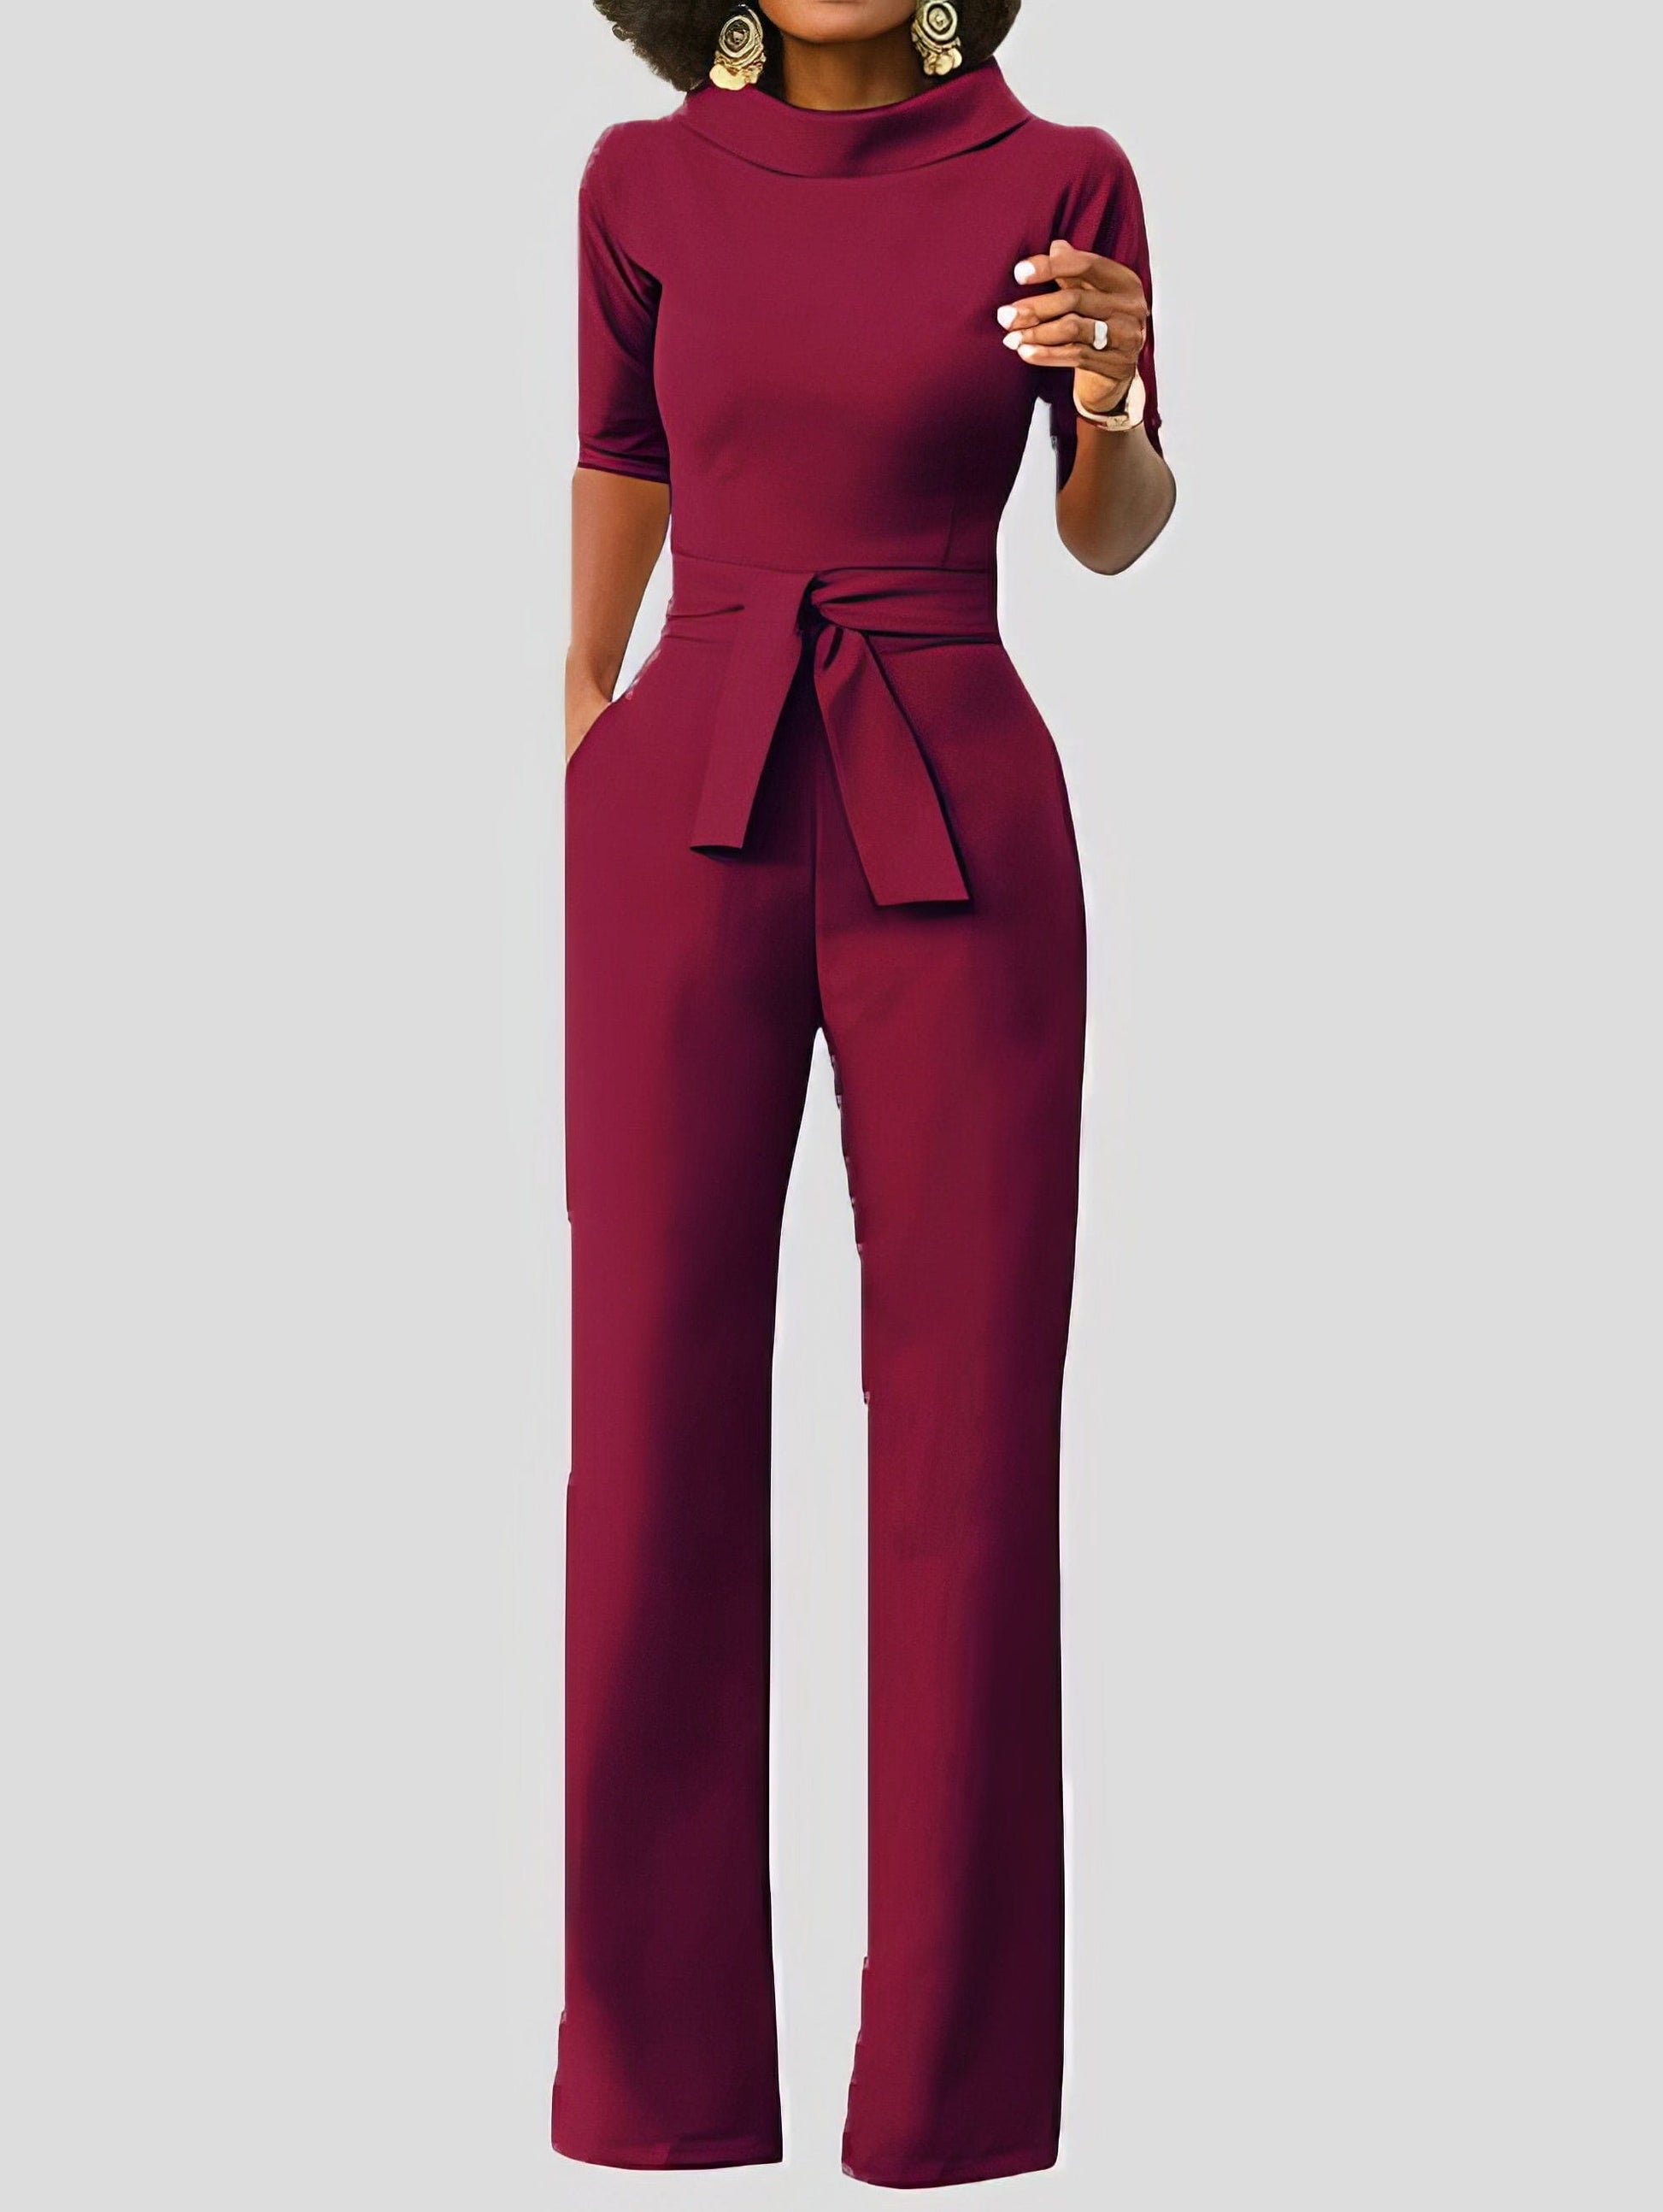 MsDressly Jumpsuits Solid Five-Point Sleeve Belted Wide-Leg Jumpsuit